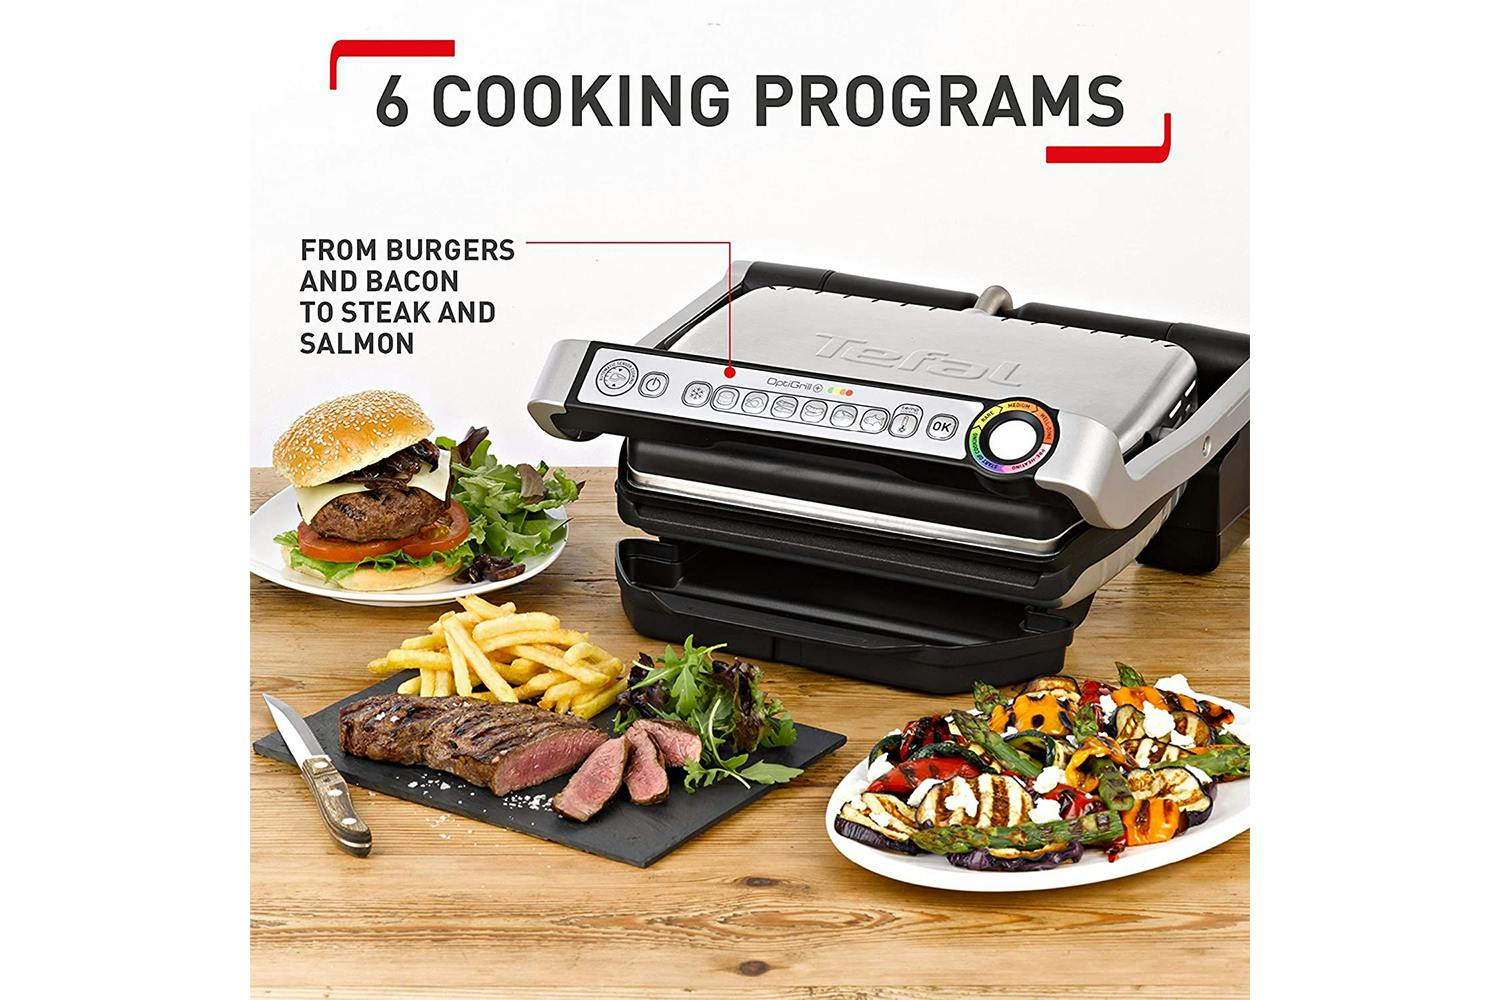 https://hniesfp.imgix.net/8/images/detailed/252/Grill_Tefal_GC713D40_3.jpg?fit=fill&bg=0FFF&w=1500&h=1000&auto=format,compress